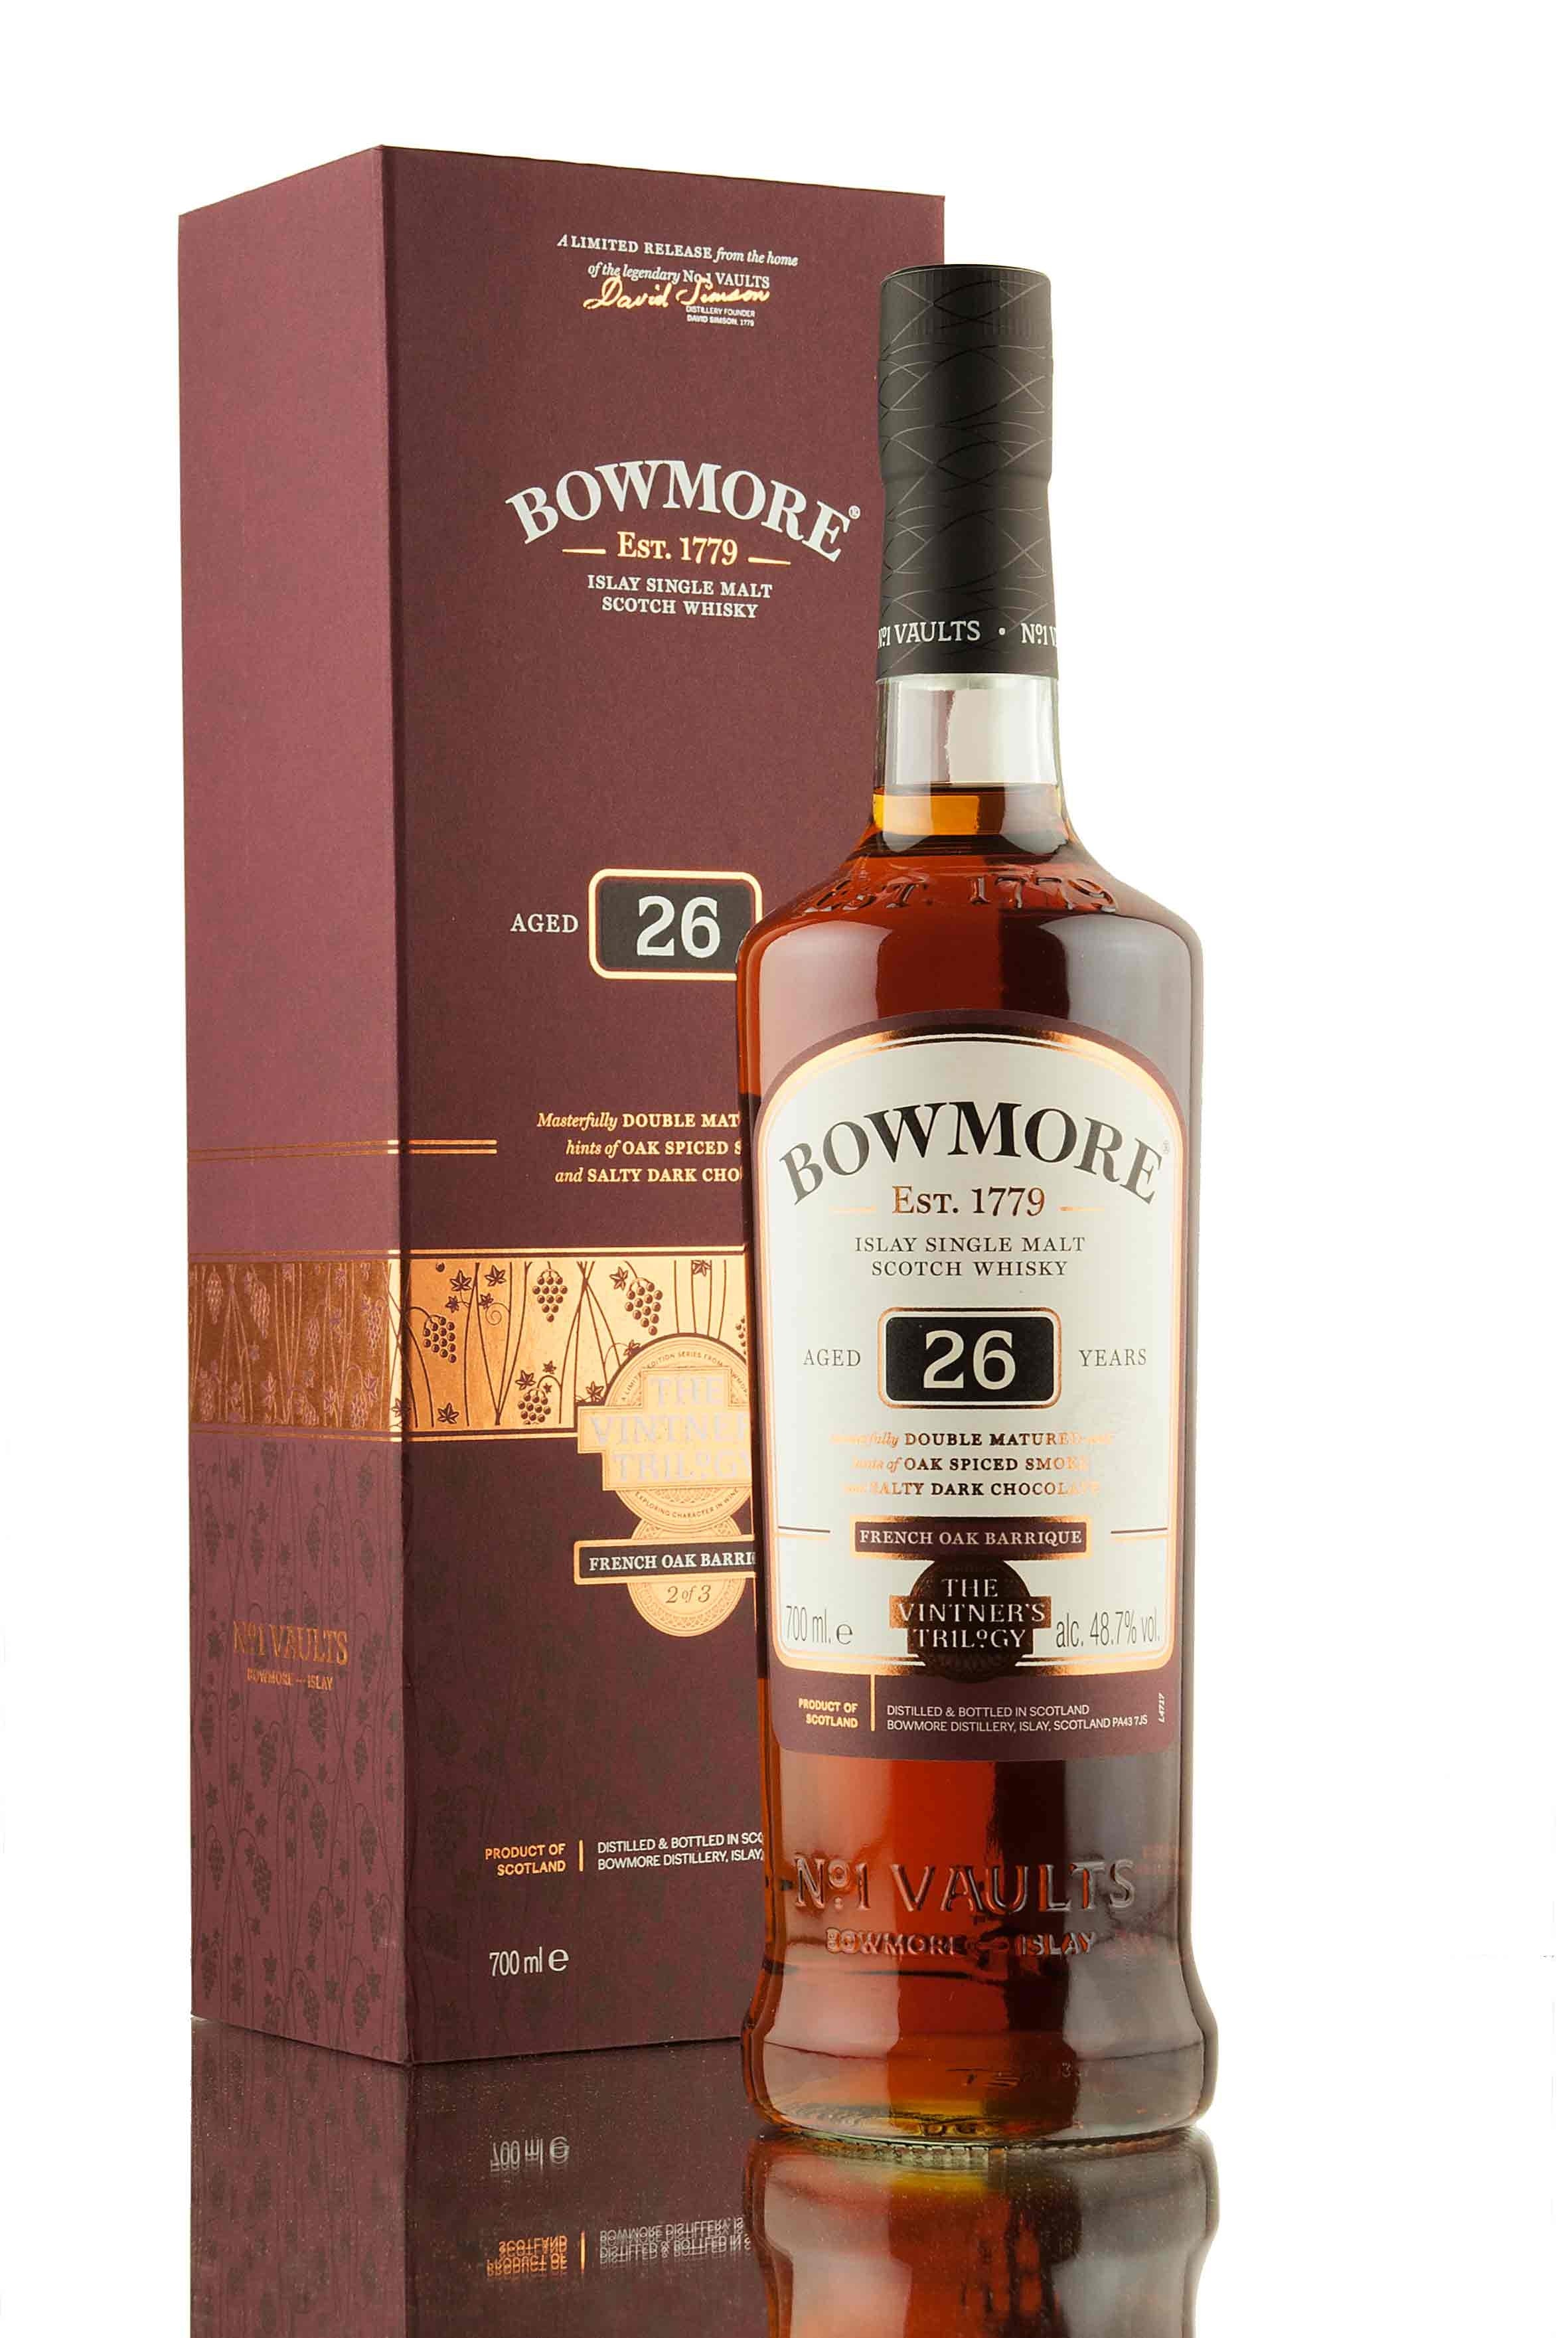 Bowmore 26 Year Old | The Vinter's Trilogy